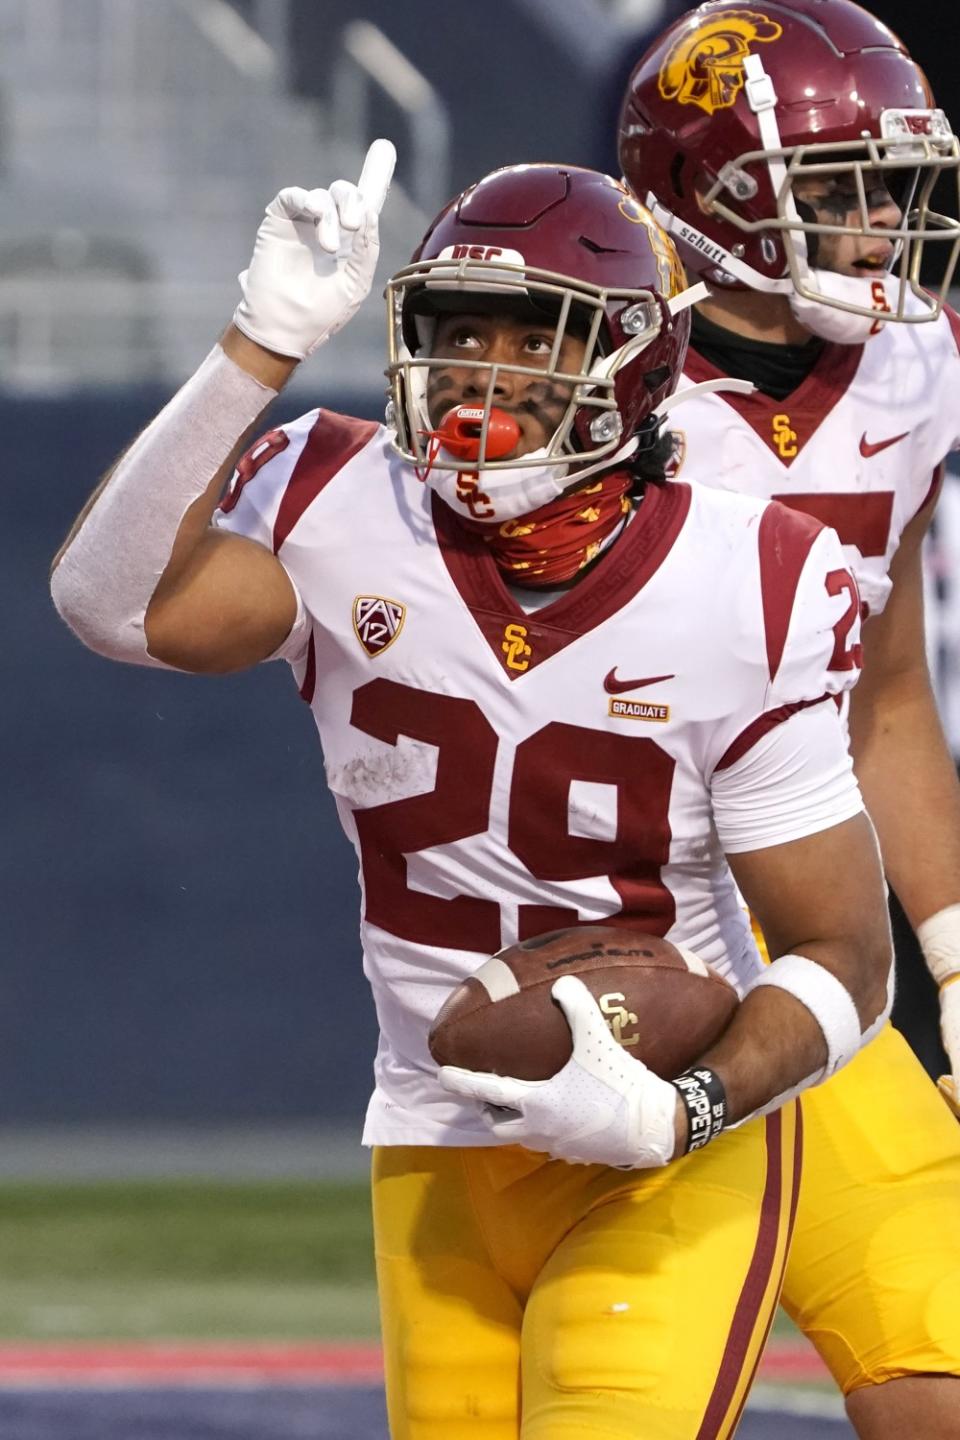 USC running back Vavae Malepeai is pictured in the second half against Arizona on Nov. 14, 2020.